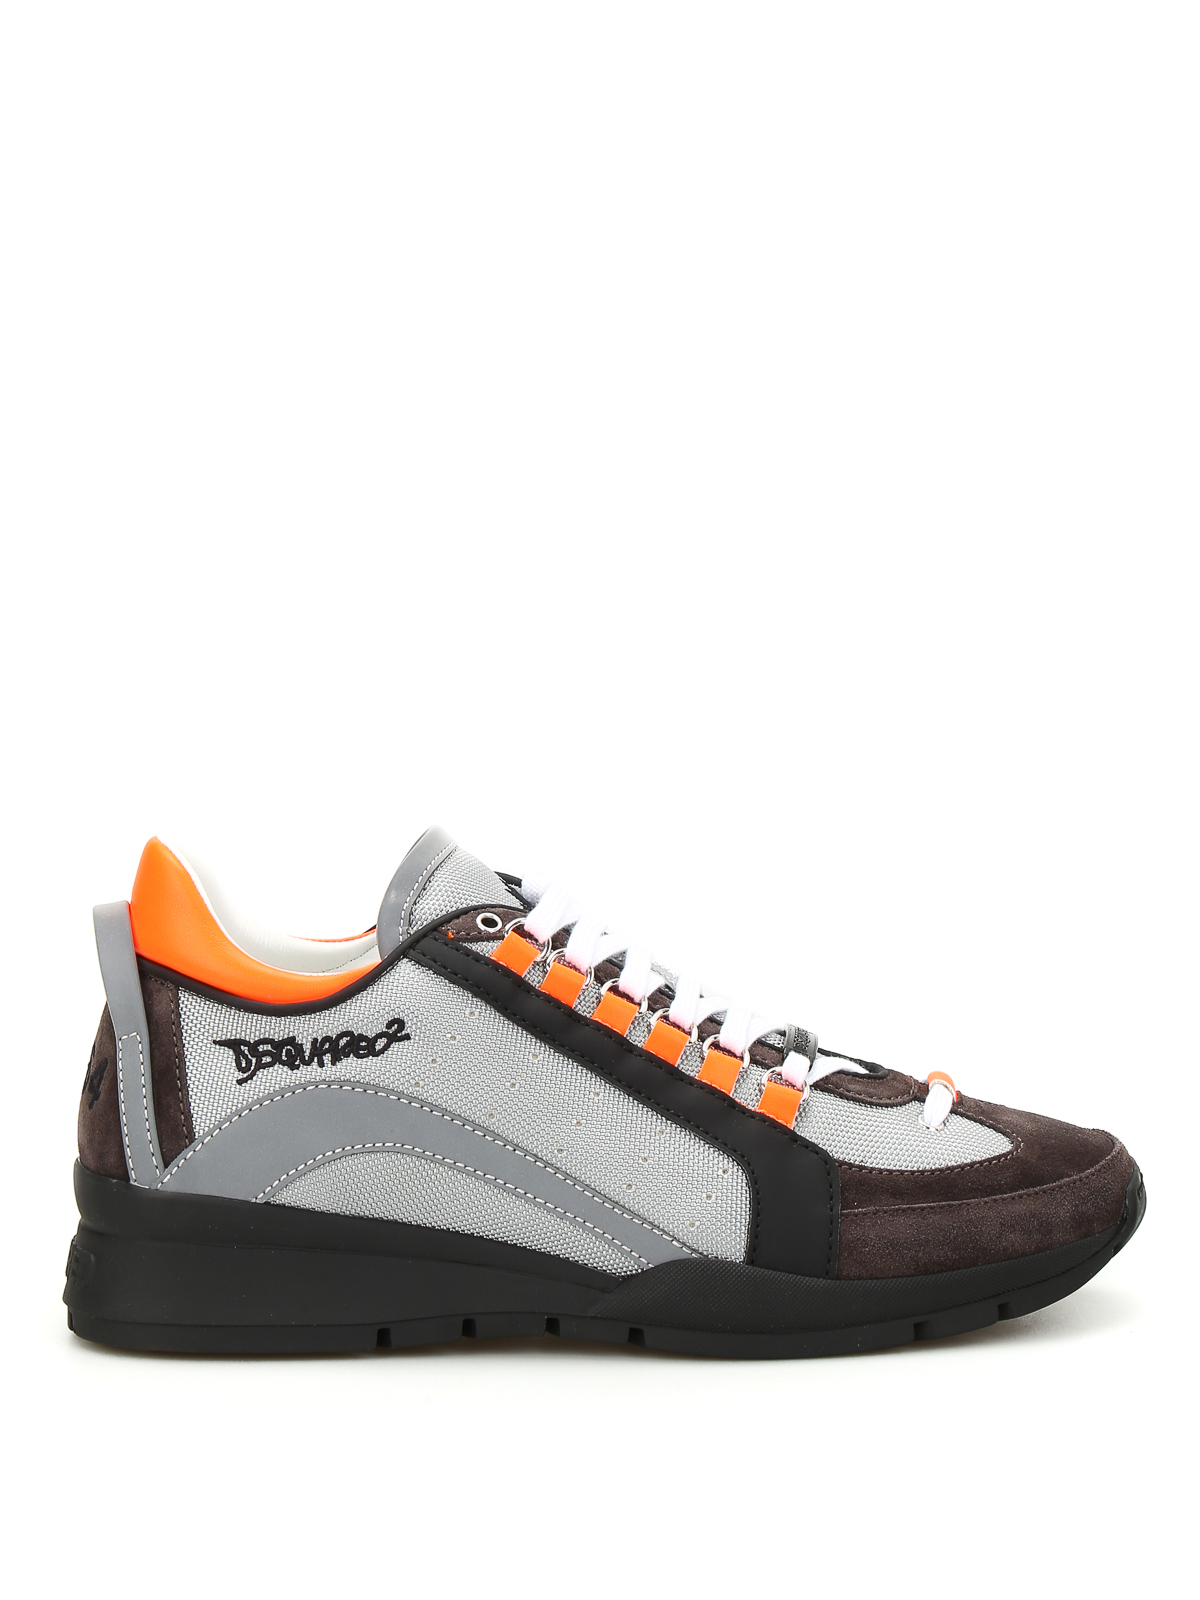 Trainers Dsquared2 - 551 sneakers - SN4041305M241 | Shop online at iKRIX